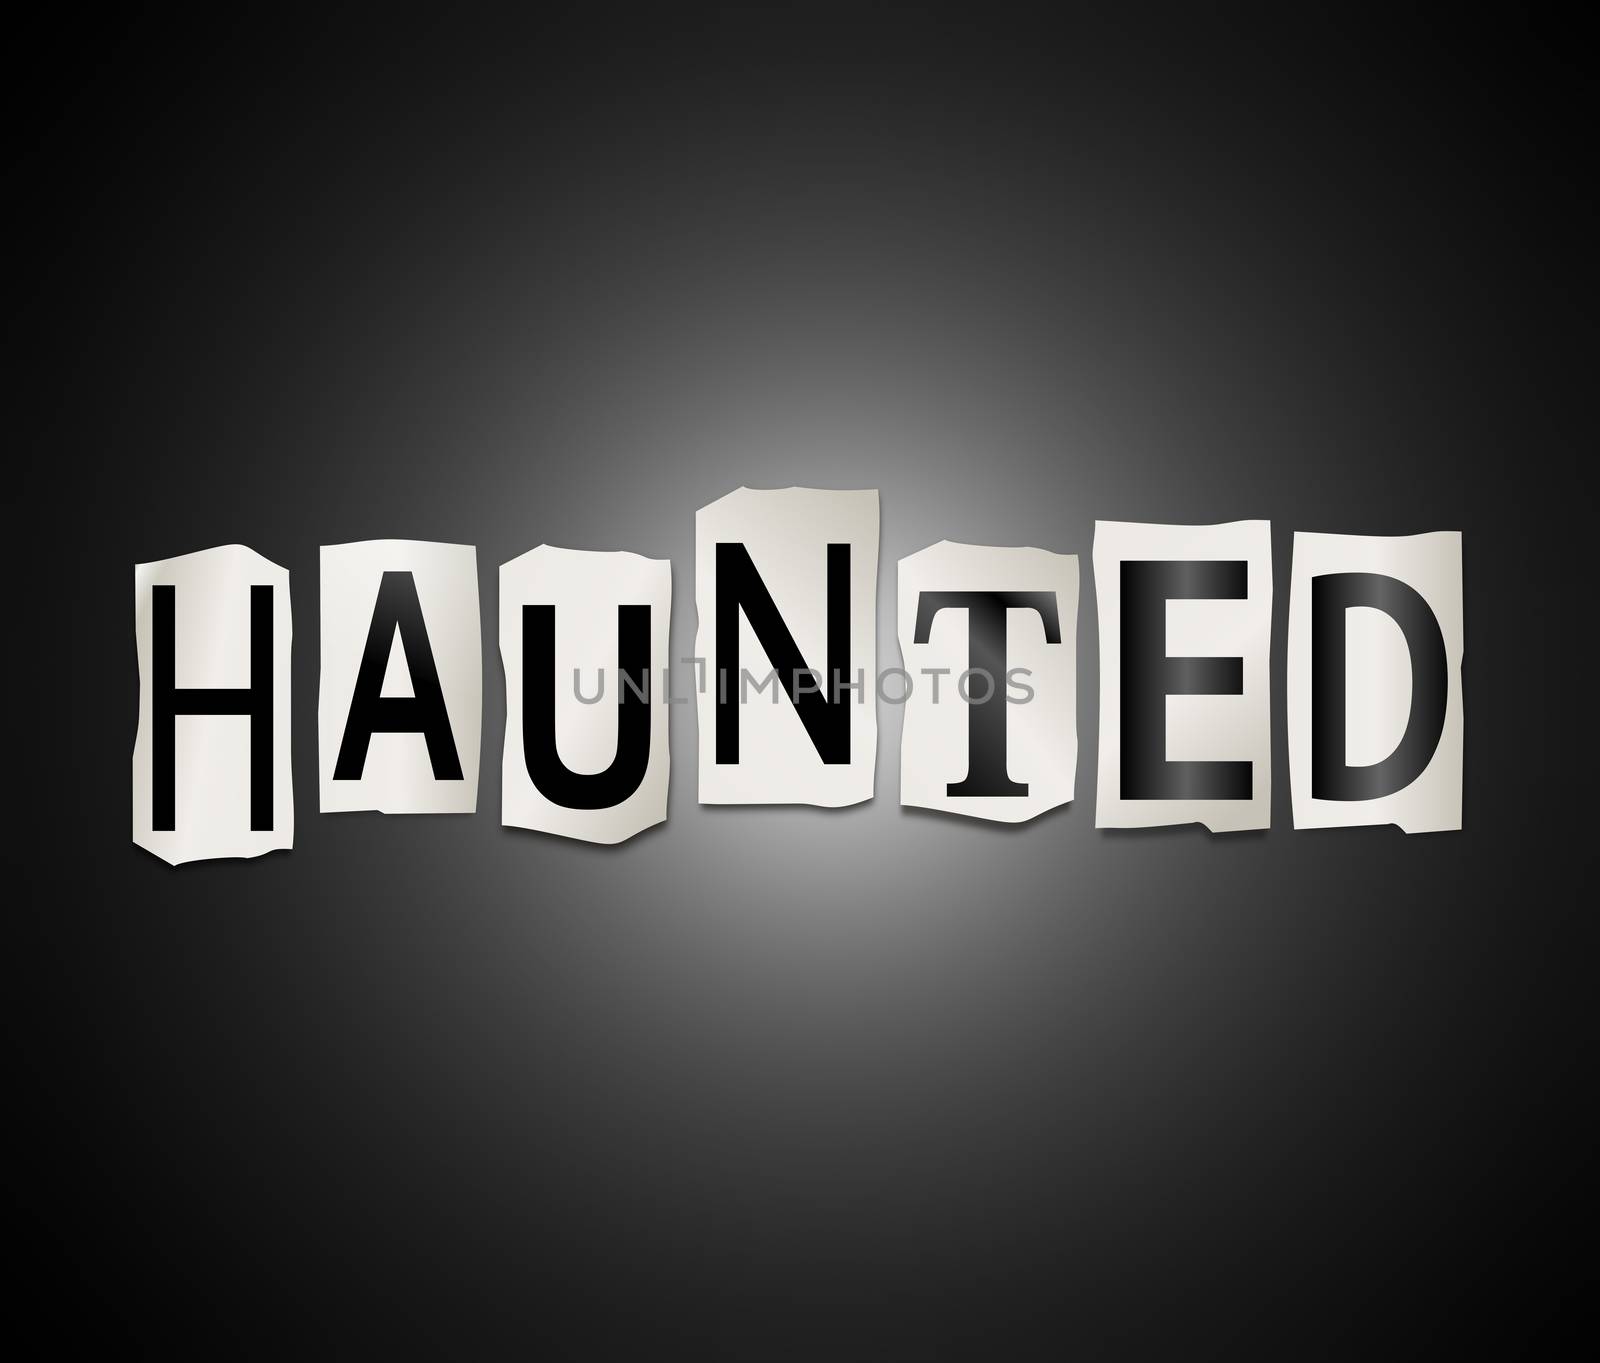 Illustration depicting a set of cut out printed letters arranged to form the word haunted.